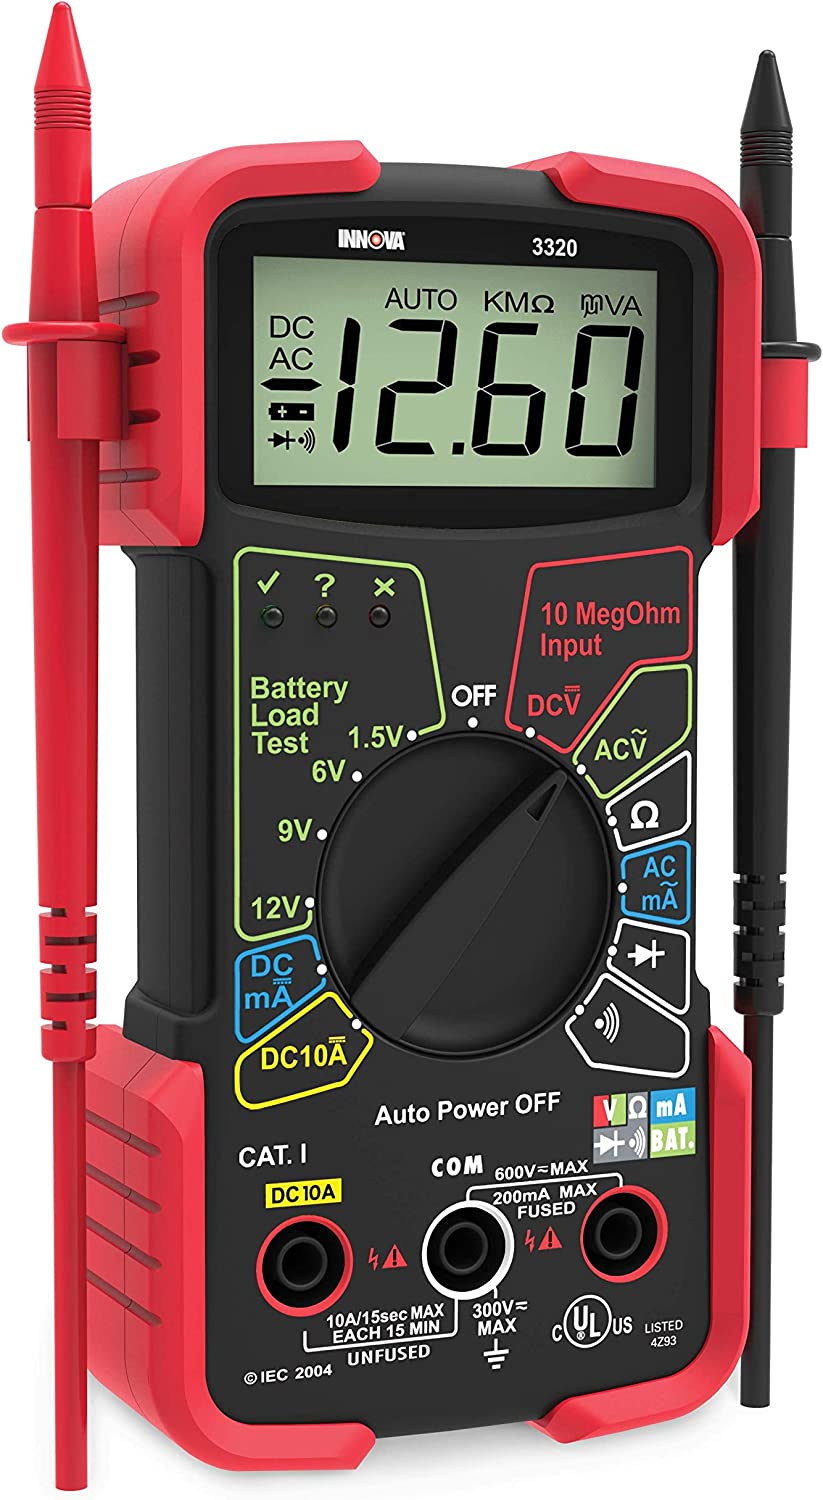 The 5 Best Budget Multimeter For Electronics: A Buyer's Guide